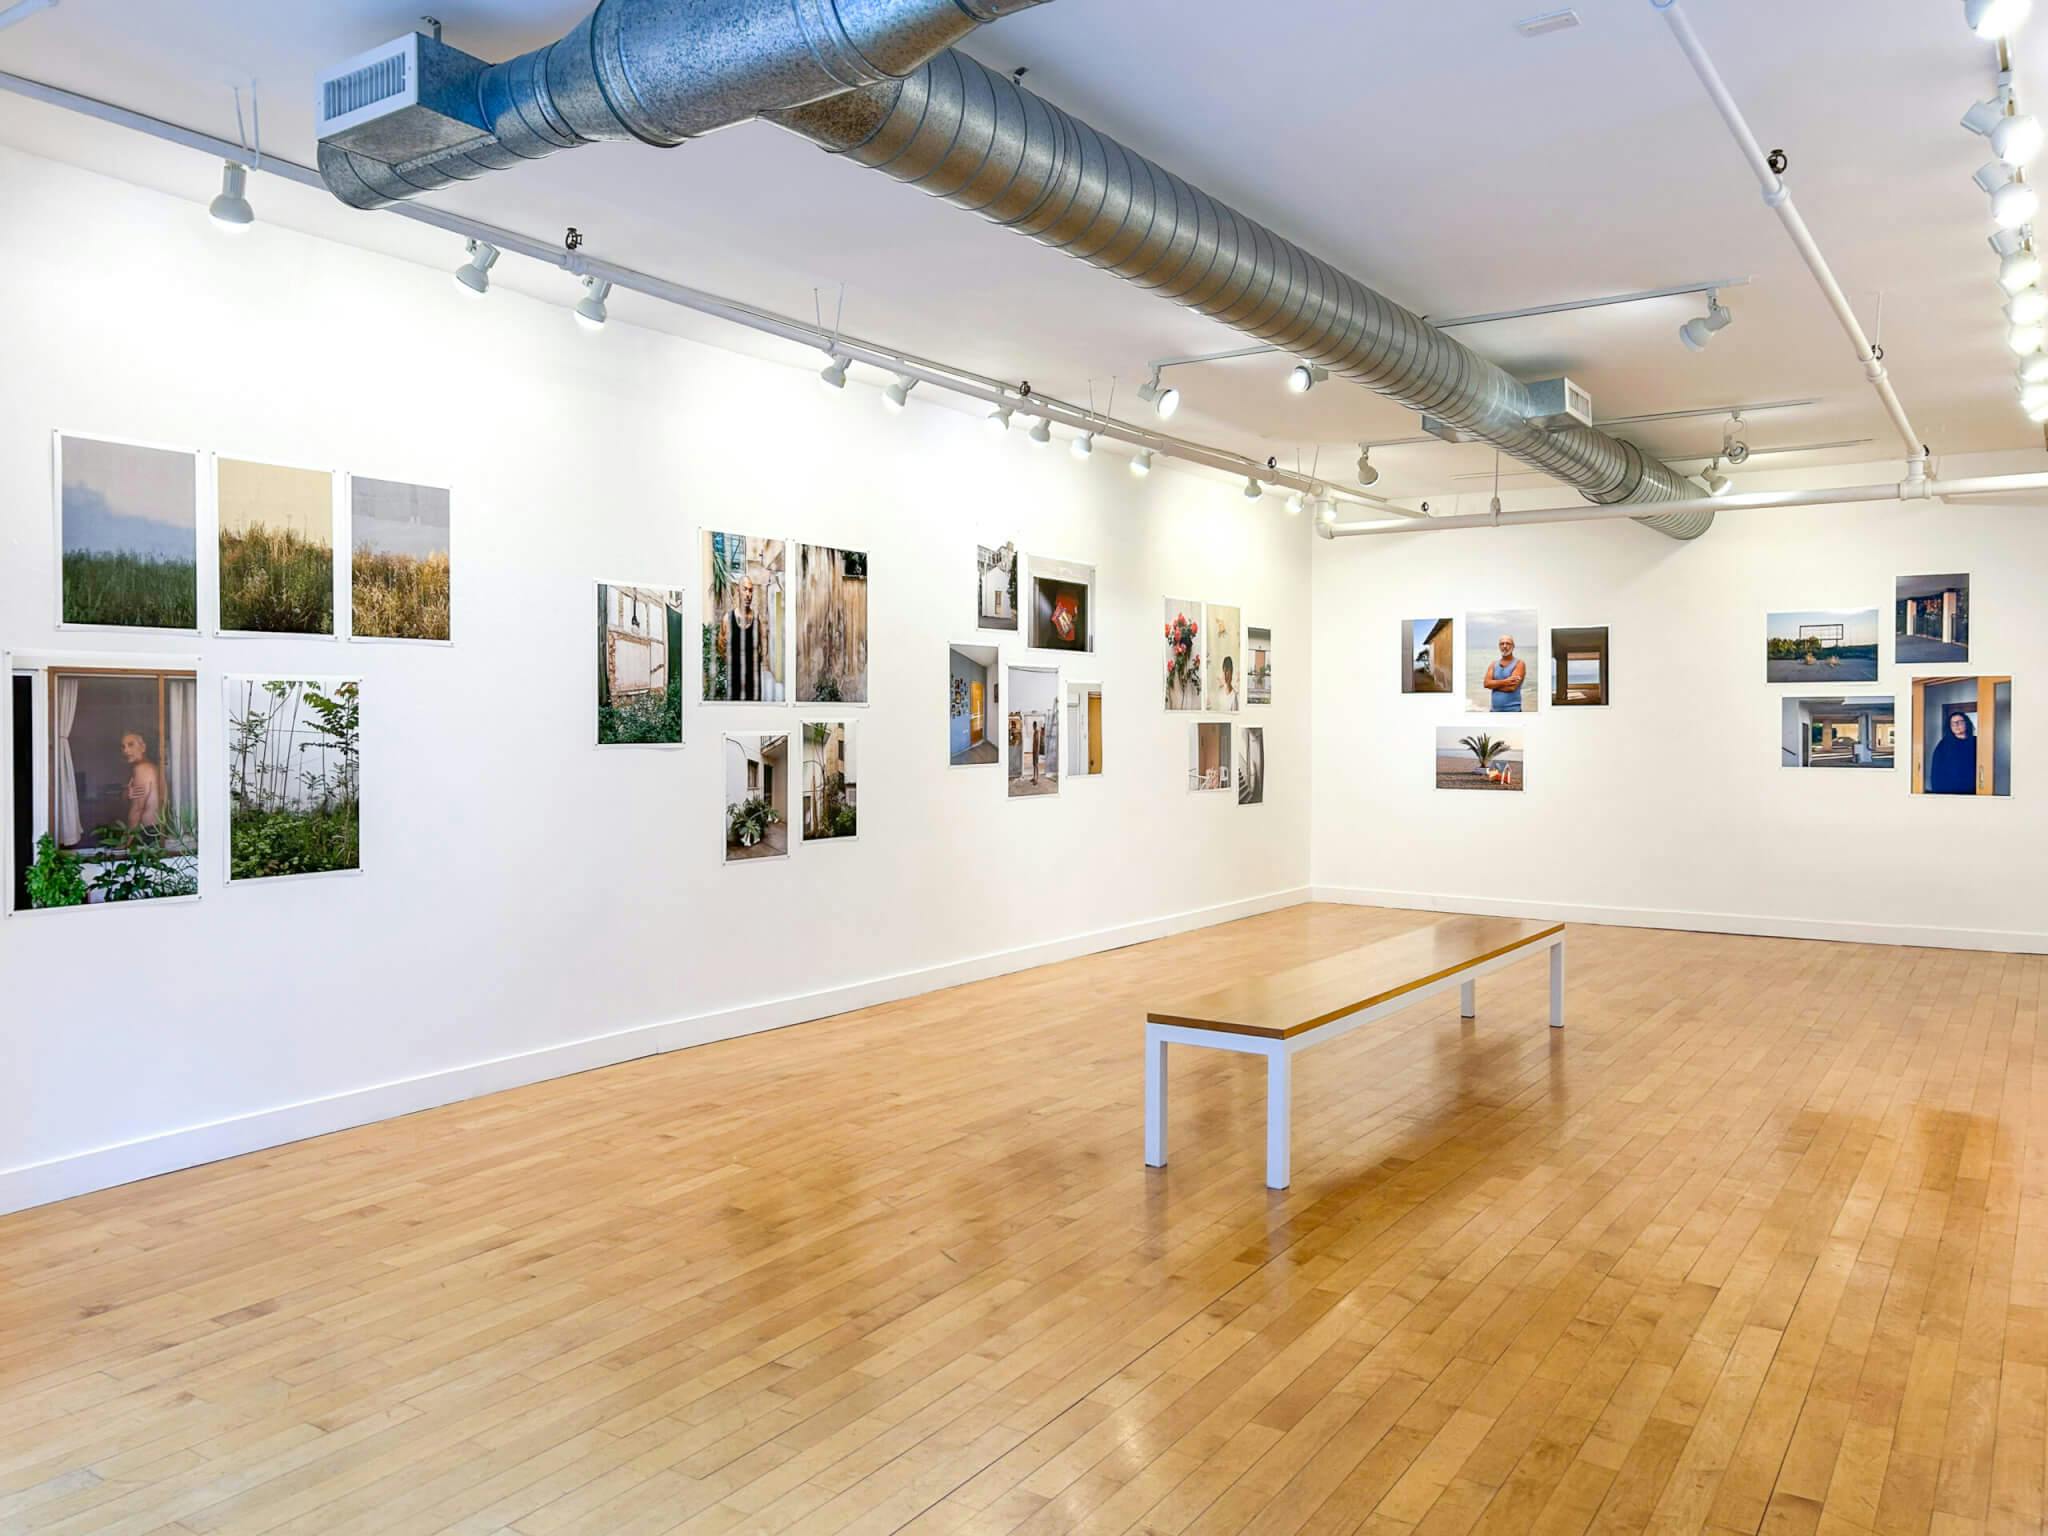 Photographs by Yorgos Efthymiadis, featuring scenes of nature and profiles of individuals, line the walls of the gallery.